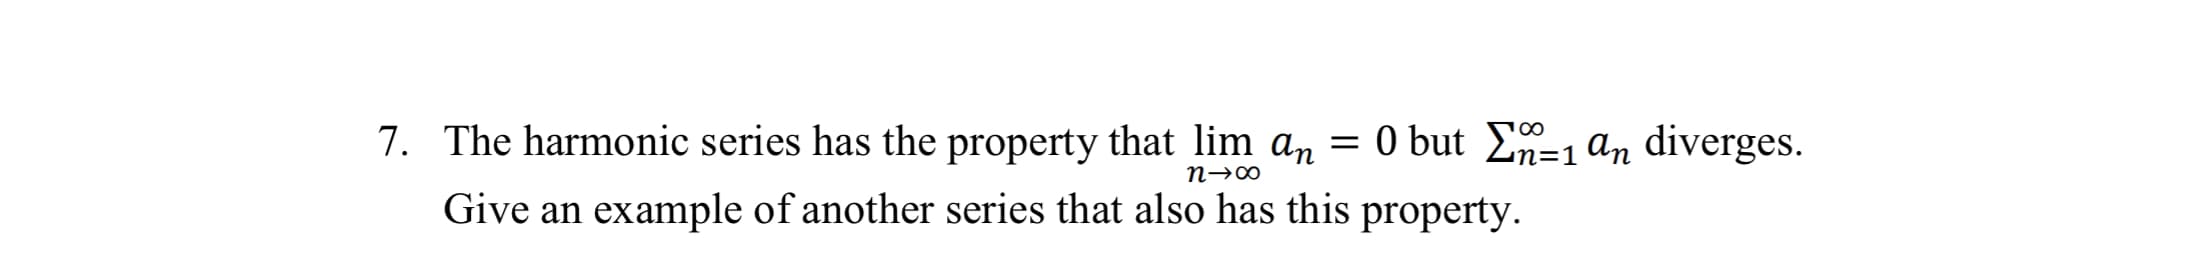 7. The harmonic series has the property that lim an = 0 but En=1 an diverges.
Give an example of another series that also has this property.
пз0
